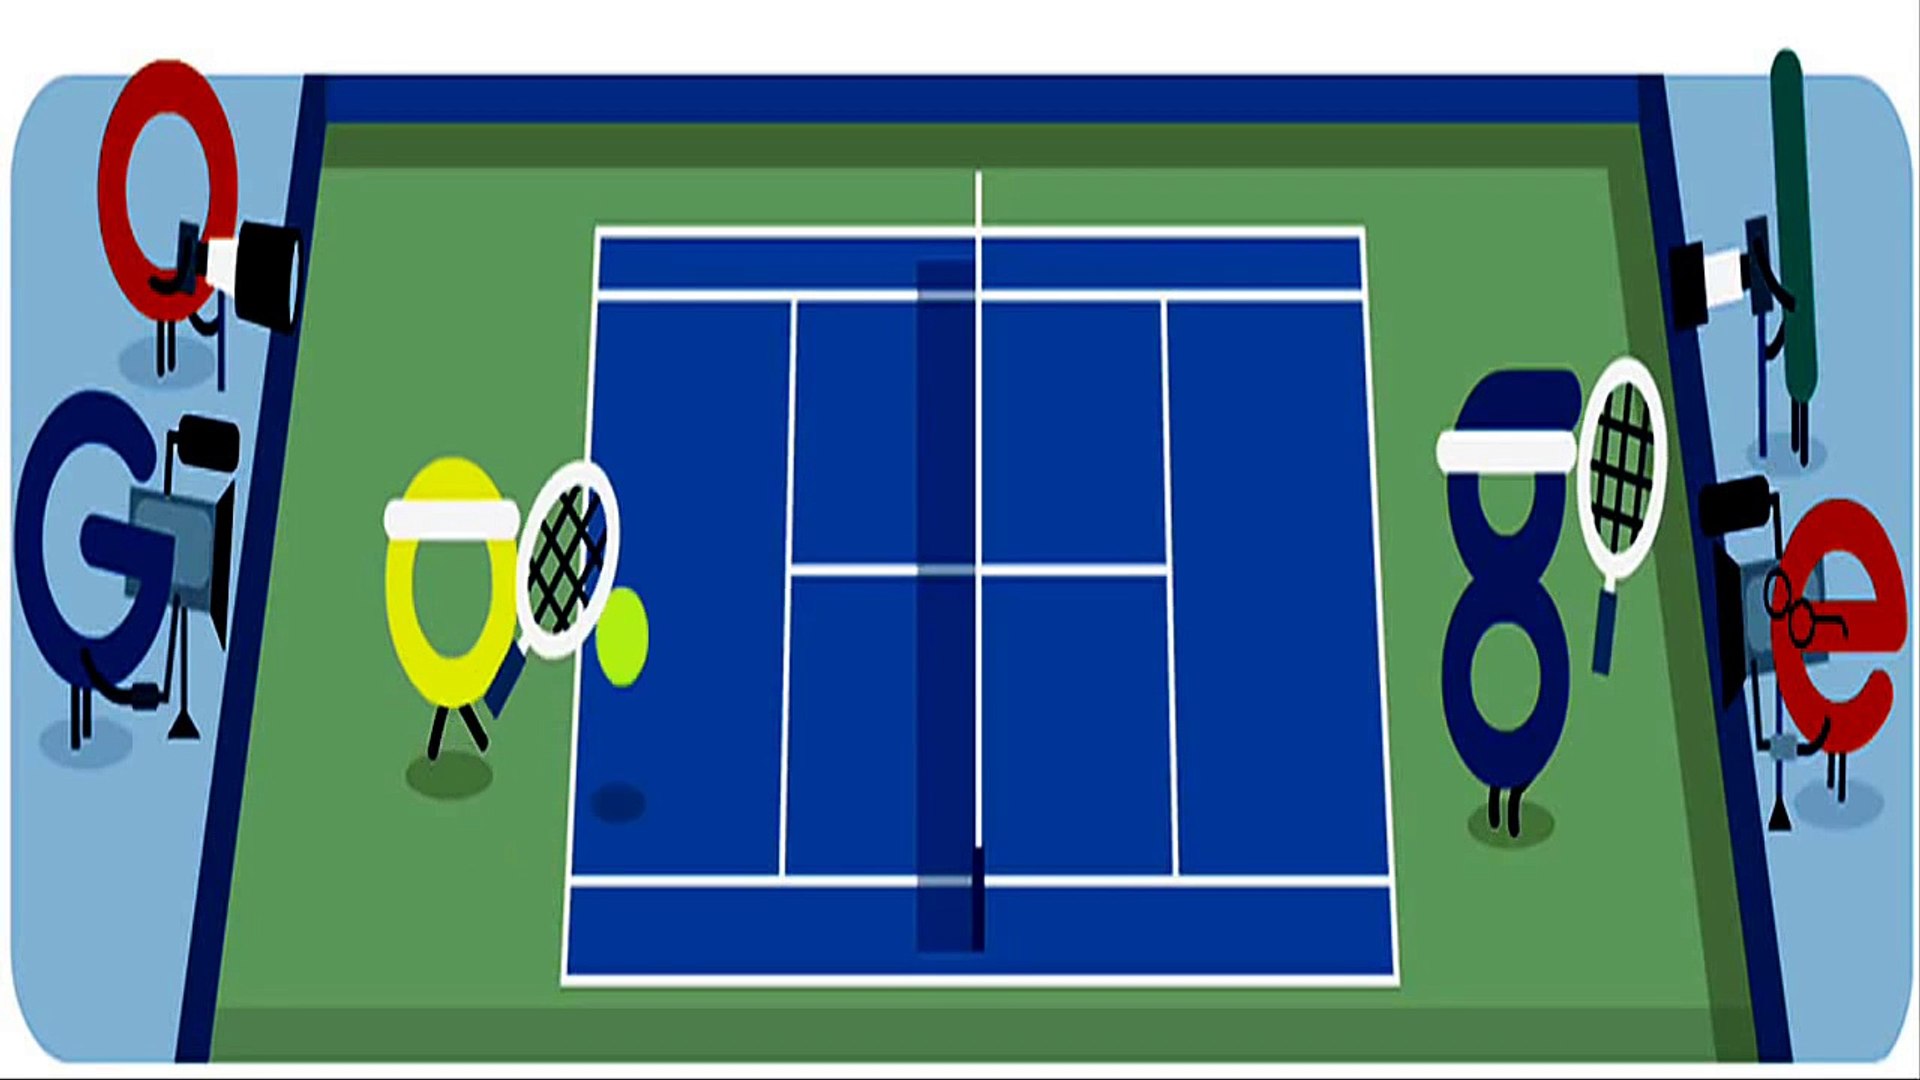 US tennis Open results Google's Doodle for marking start of the 2015 US  Open Tennis Championship - Dailymotion Video